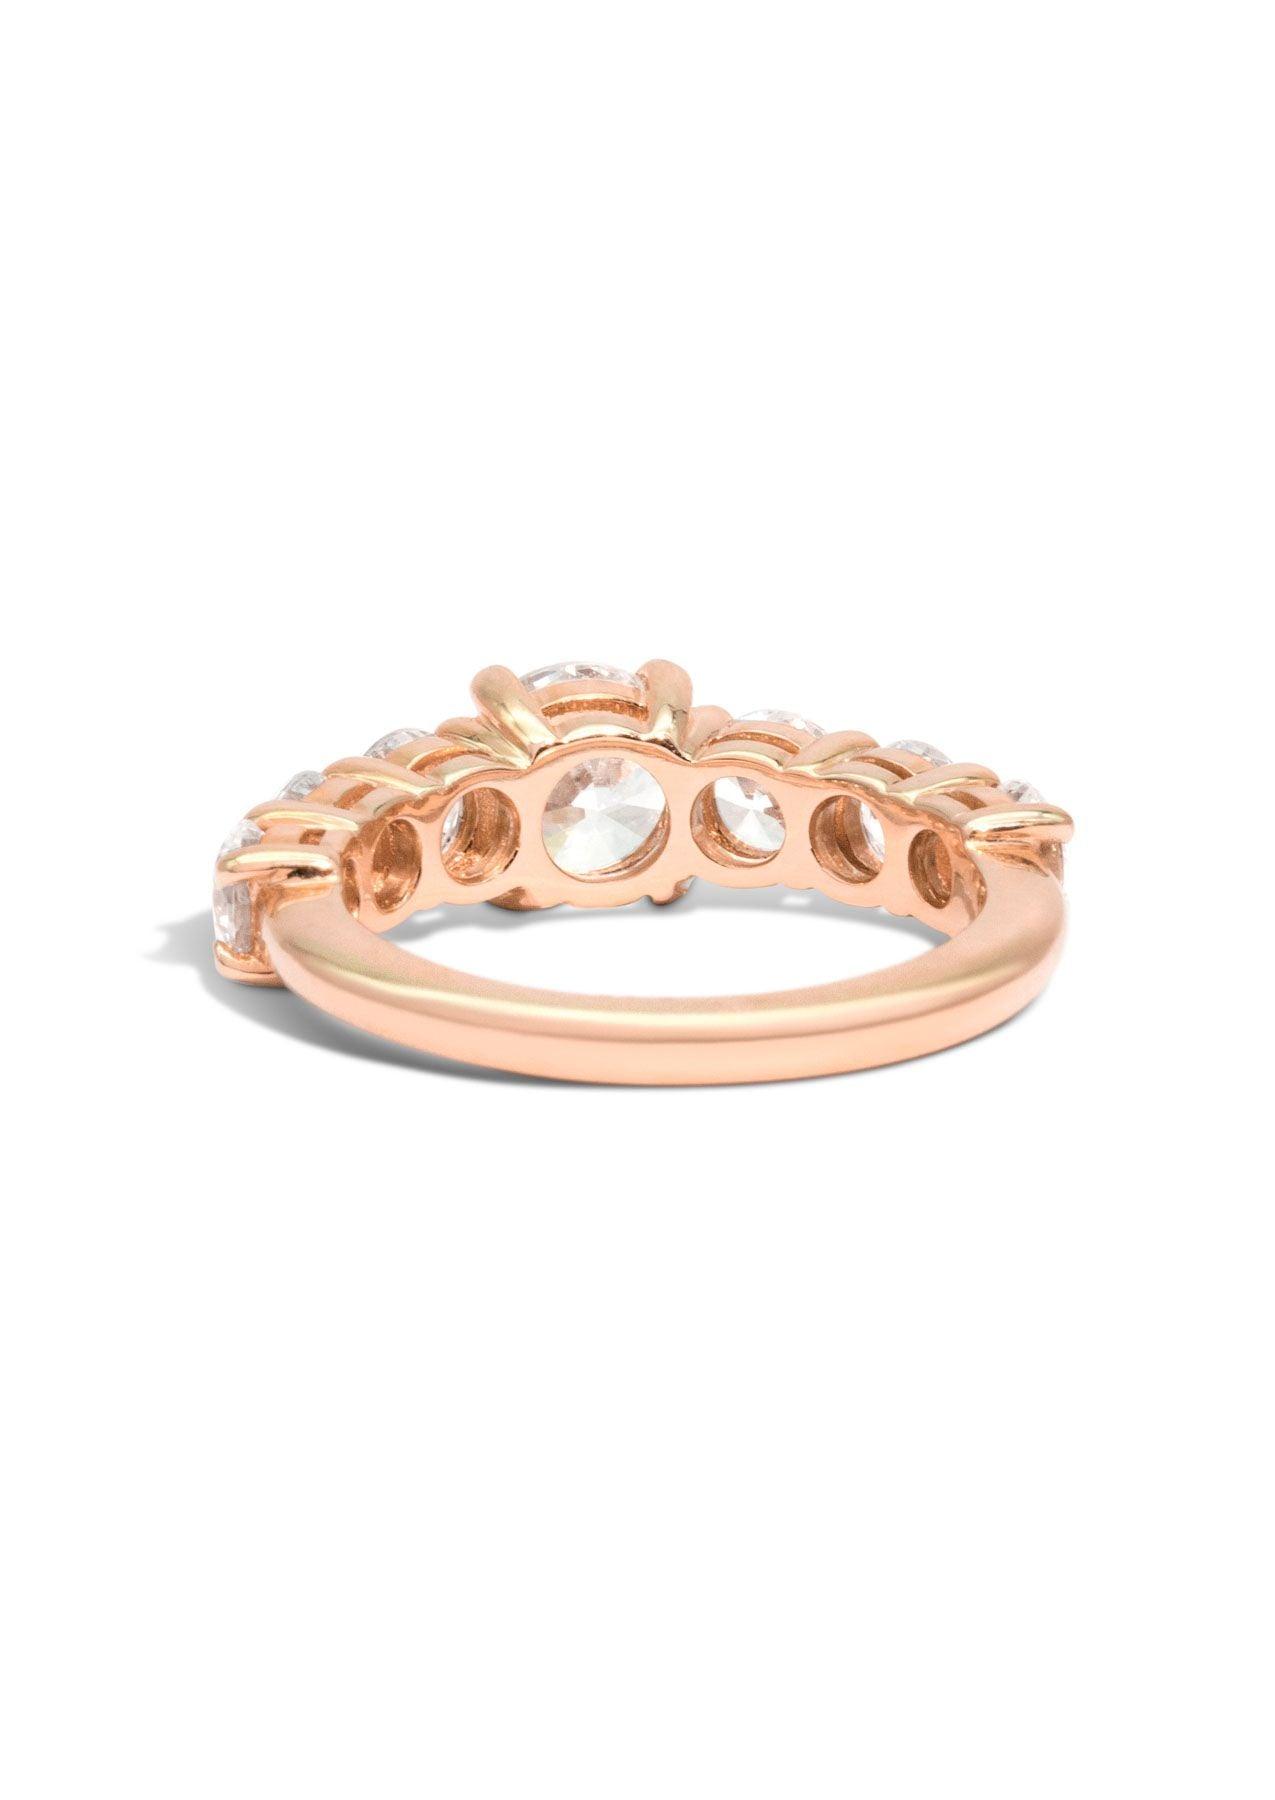 The Round Brilliant Banks Rose Gold Cultured Diamond Ring